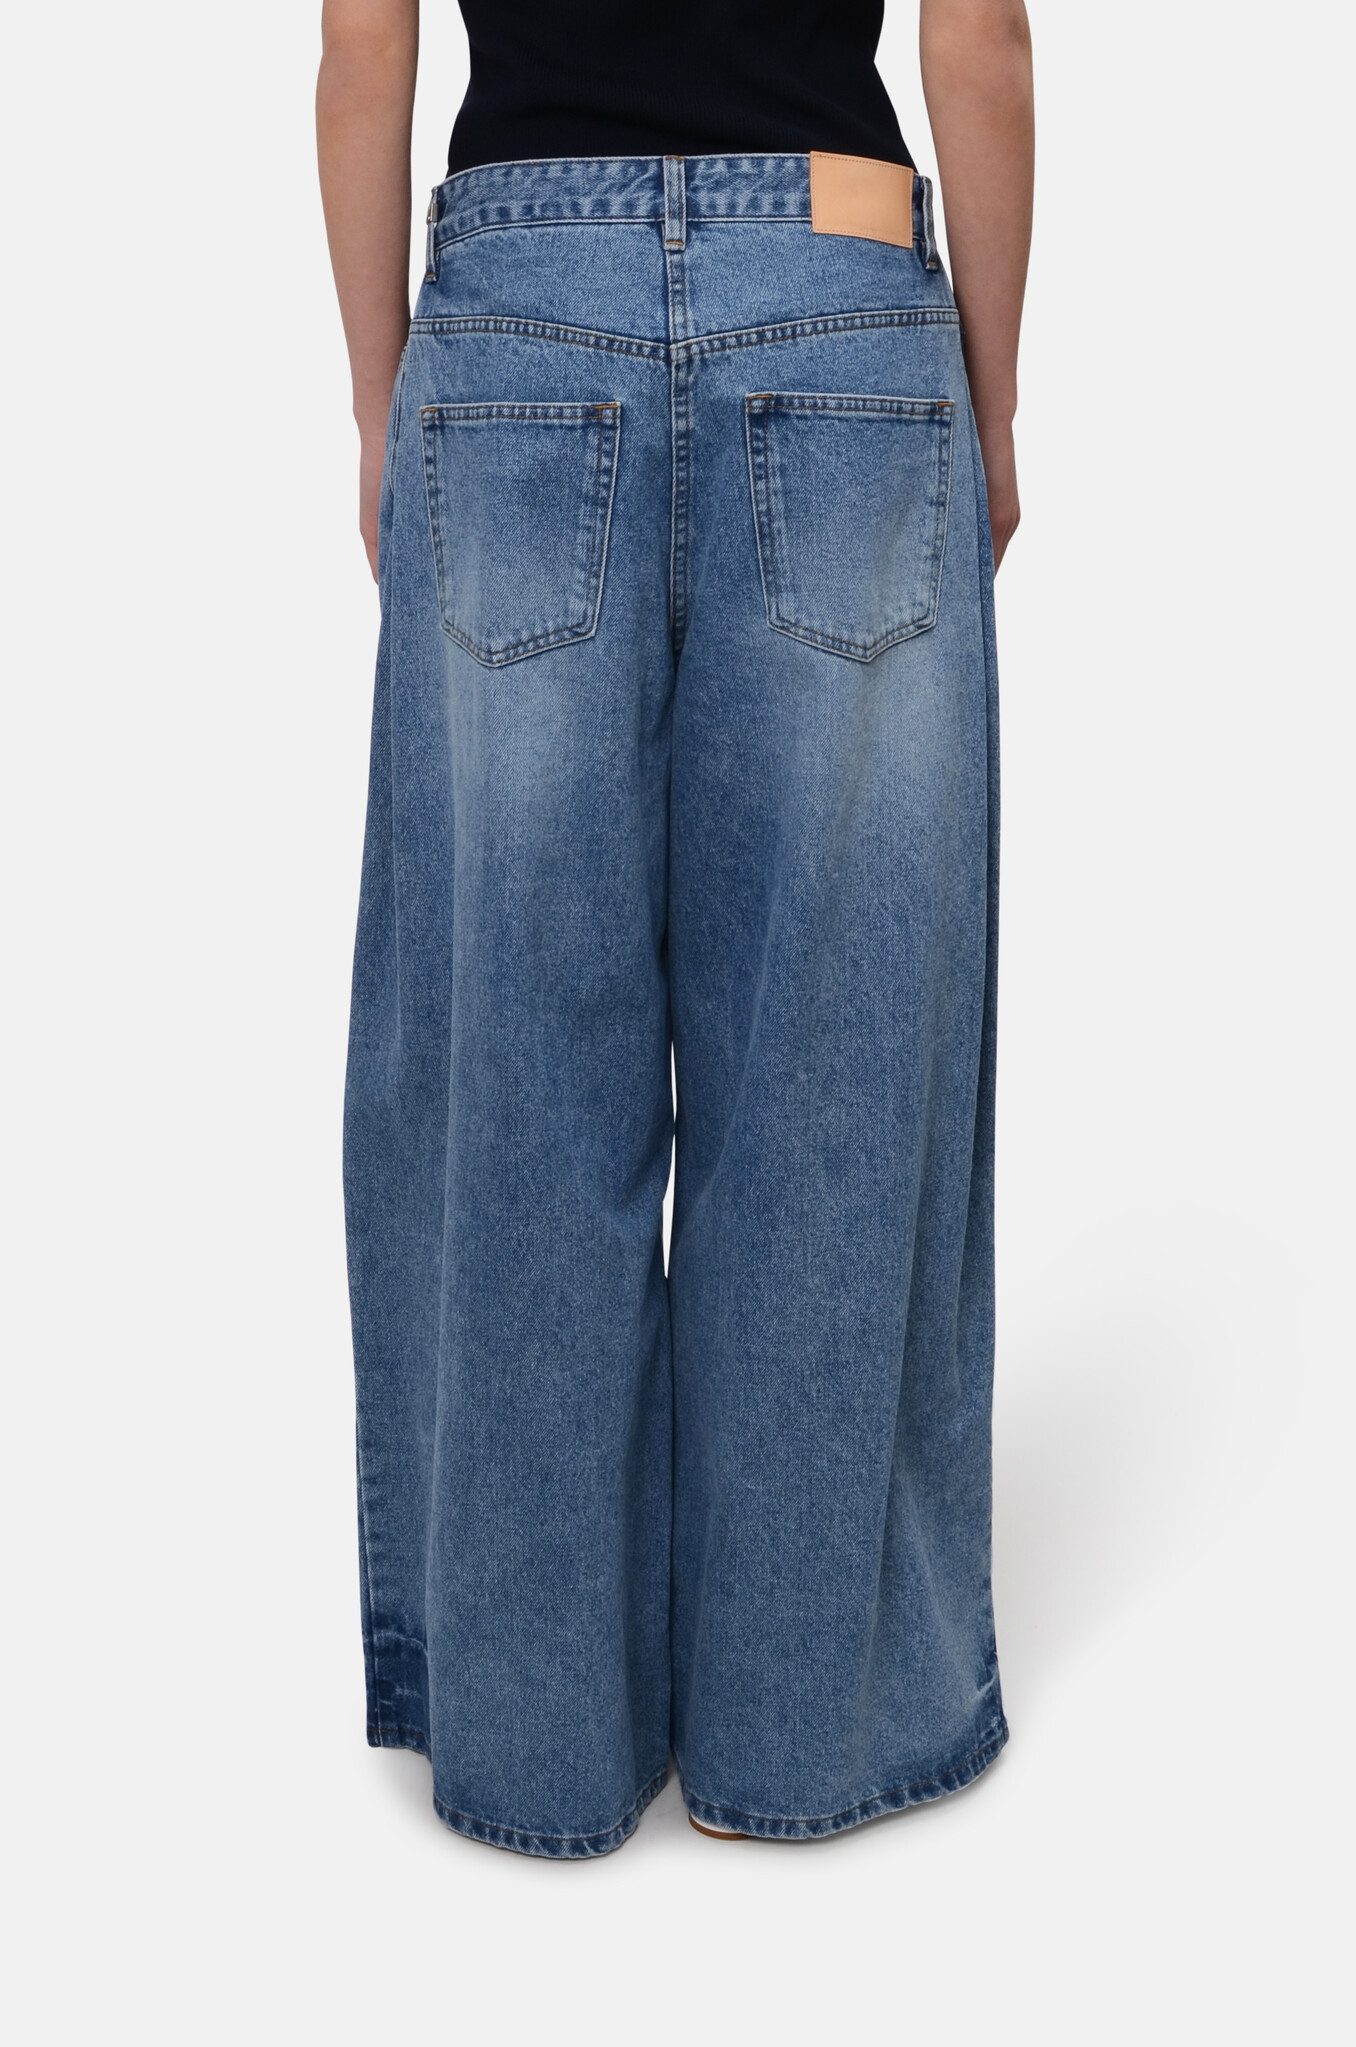 Double Tucked Jeans in Smoke Blue-4